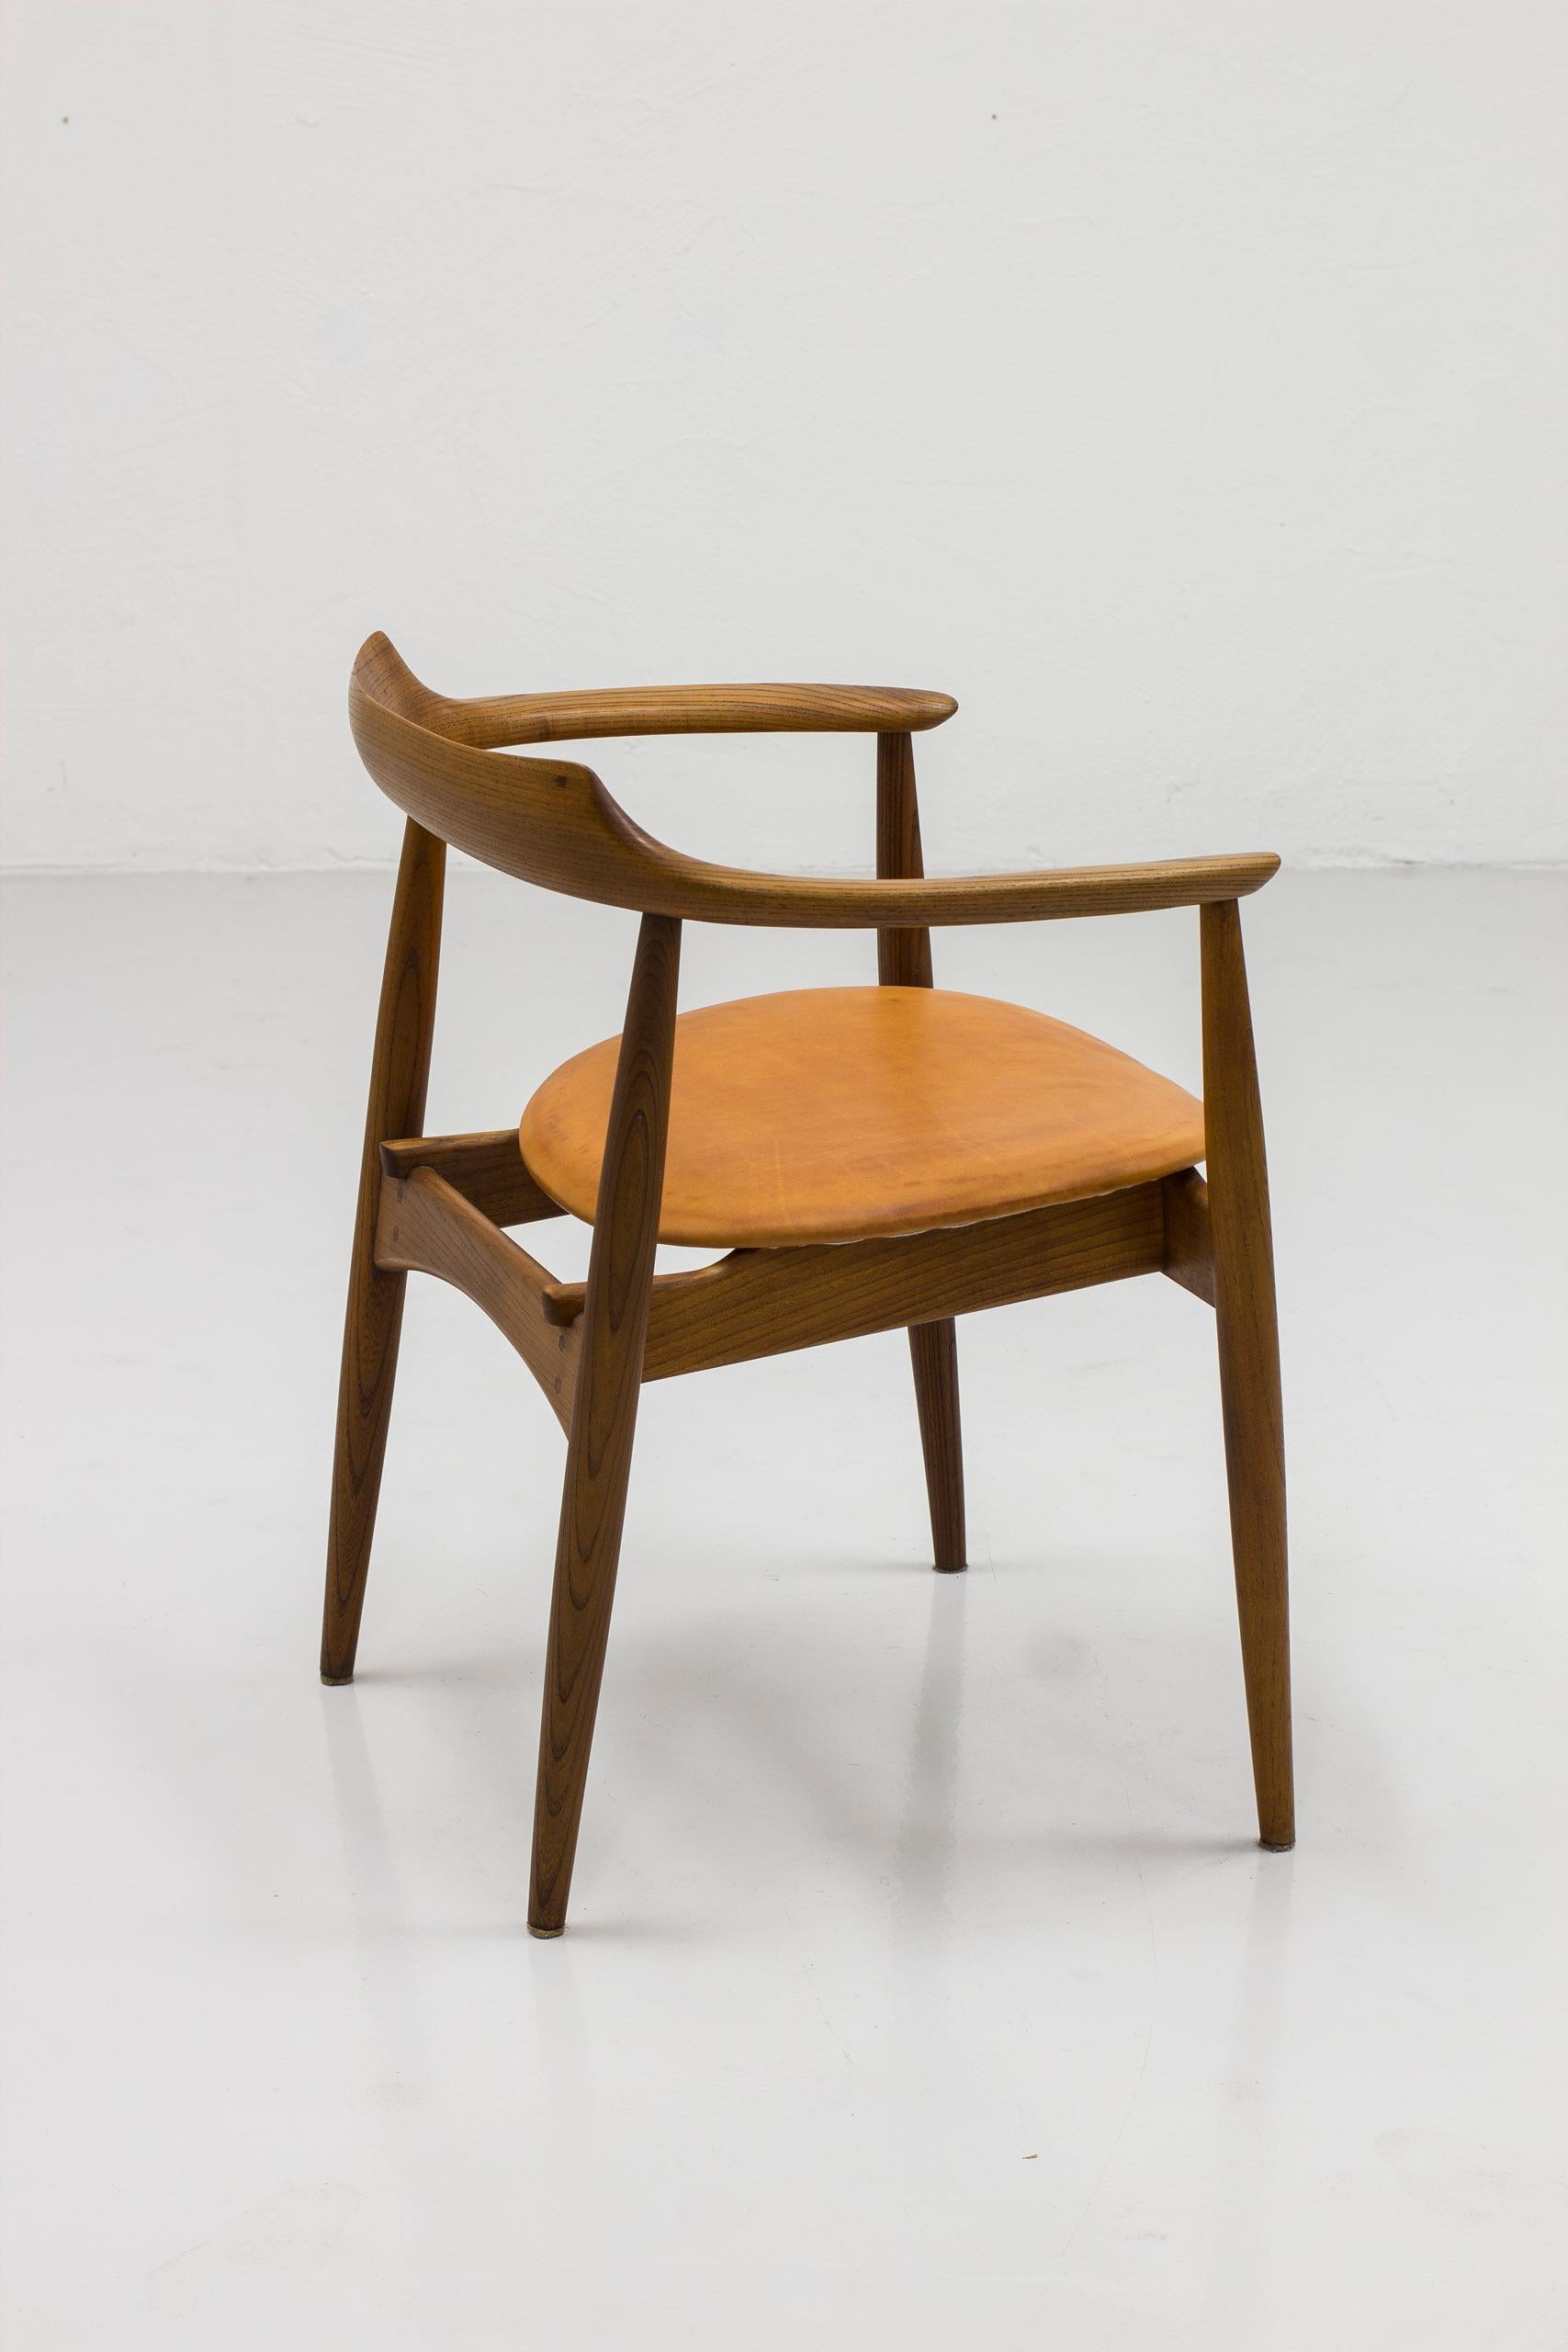 Scandinavian Modern Arm chair in elm and leather with exquisite patina by Arne Wahl Iversen, 1960s For Sale